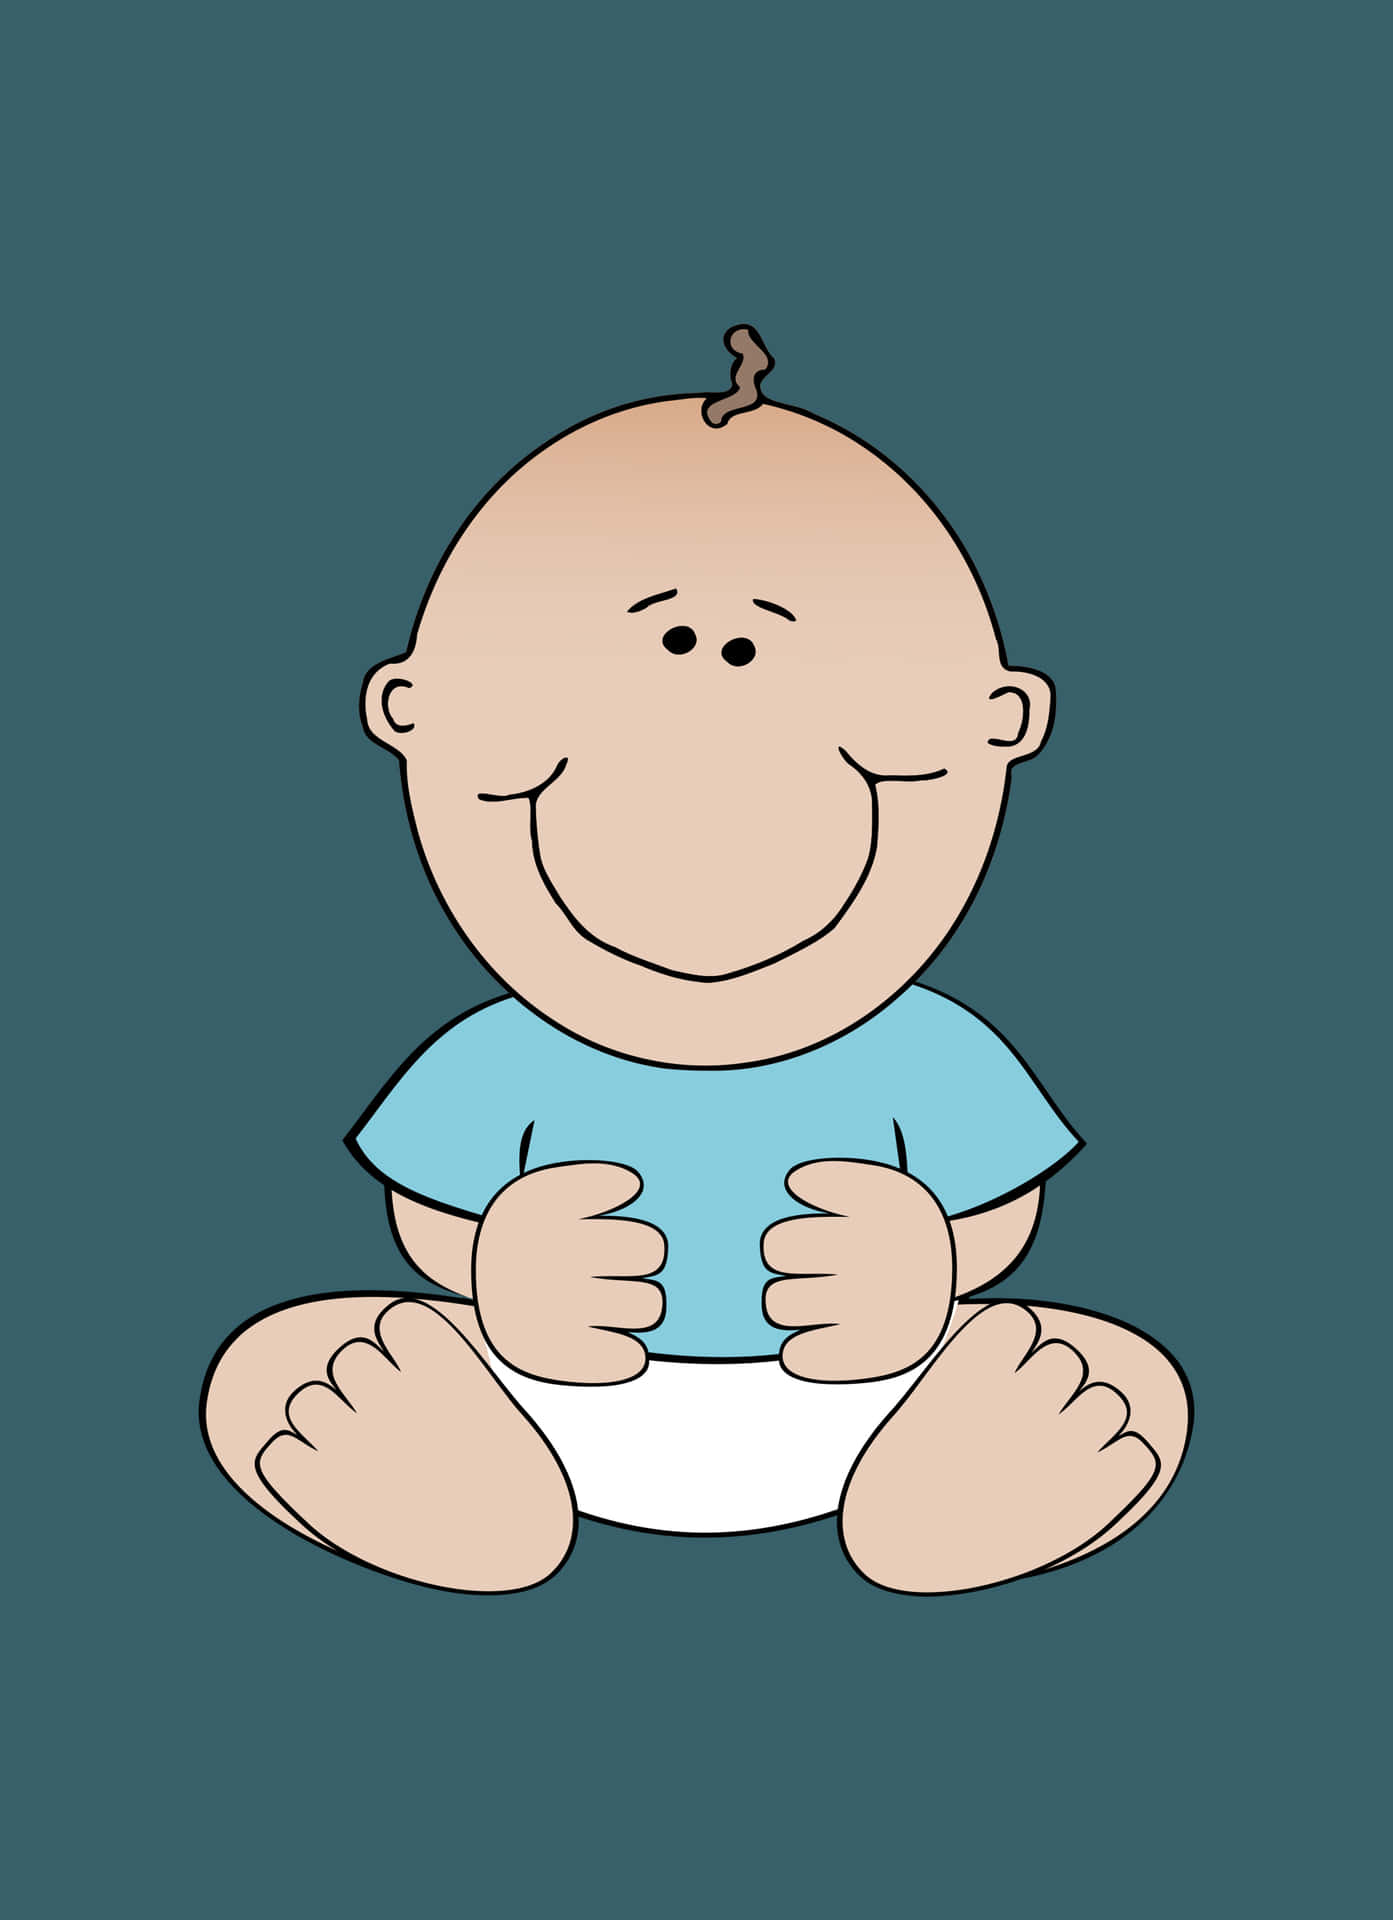 A Cartoon Baby Sitting On His Stomach